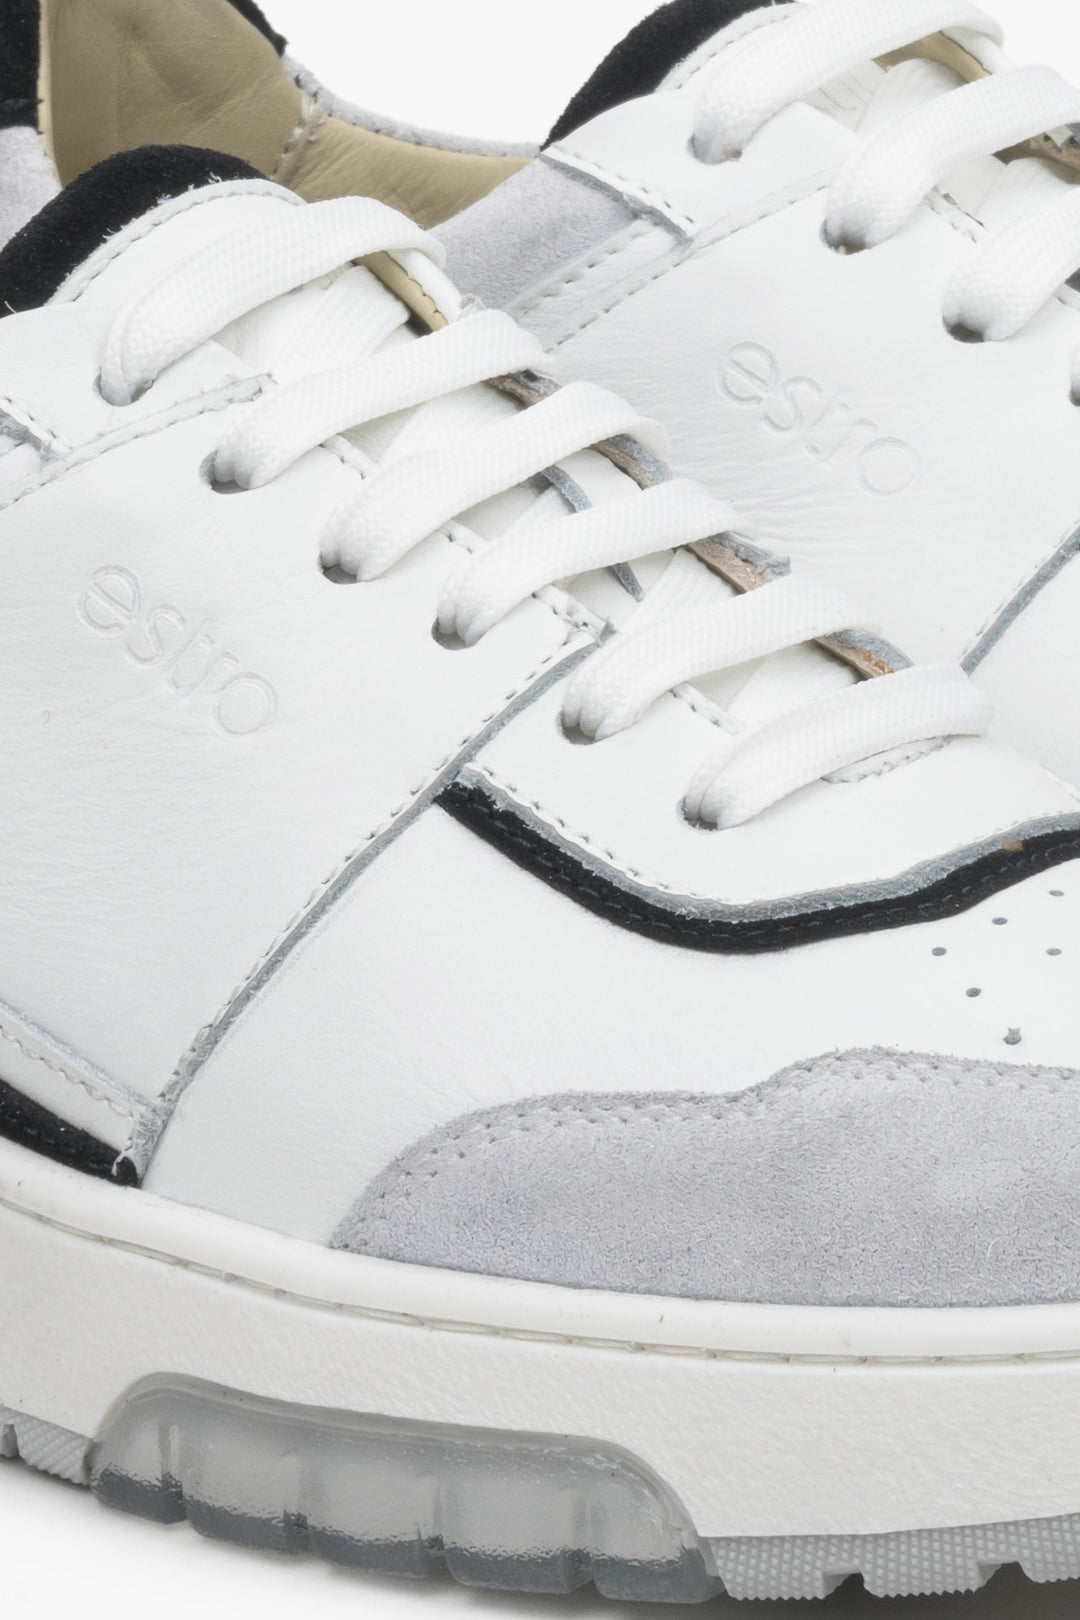 Women's sneakers made of genuine leather and suede in grey, black and white - close-up on the details.